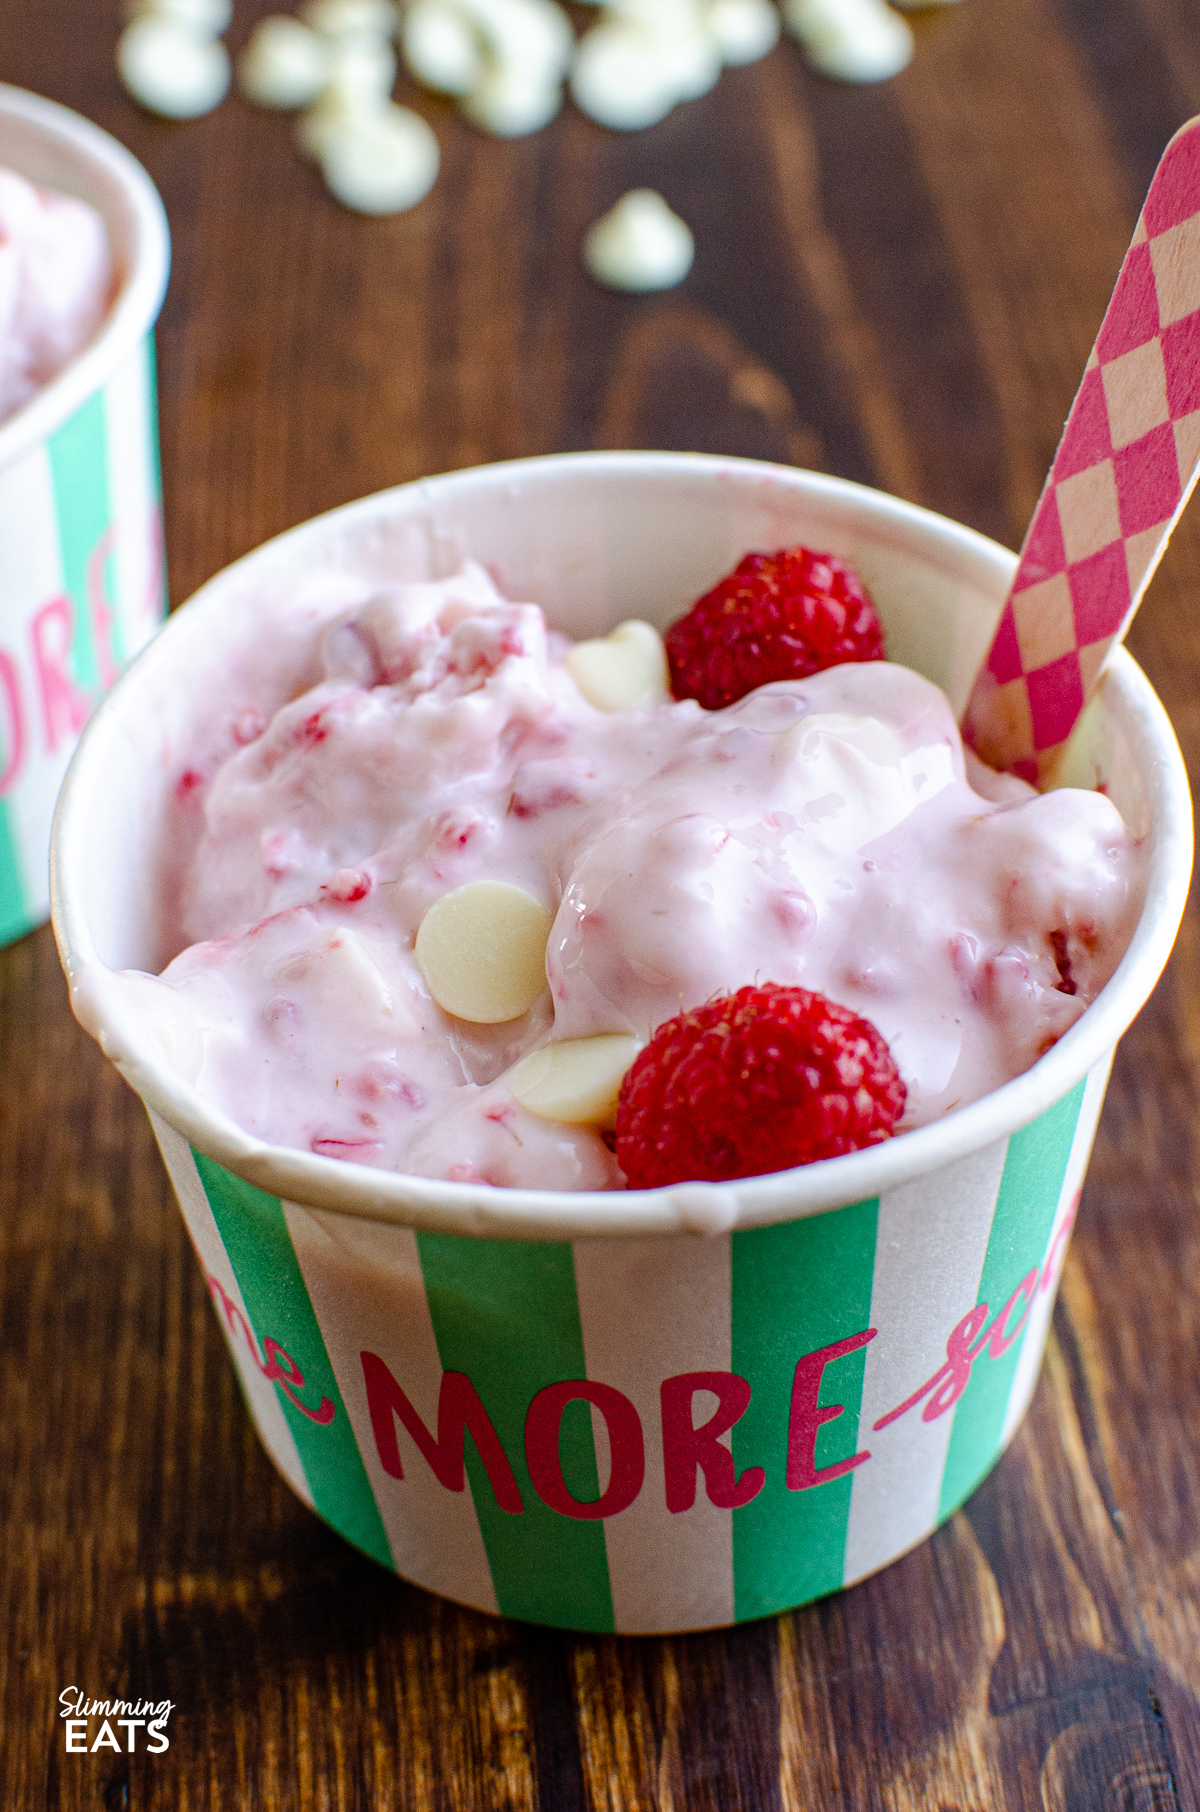 close up of Raspberry and White Chocolate Frozen Yoghurt in a icecream tub with pink diamond patterned wooden spoon, and scattered white chocolate chips in background